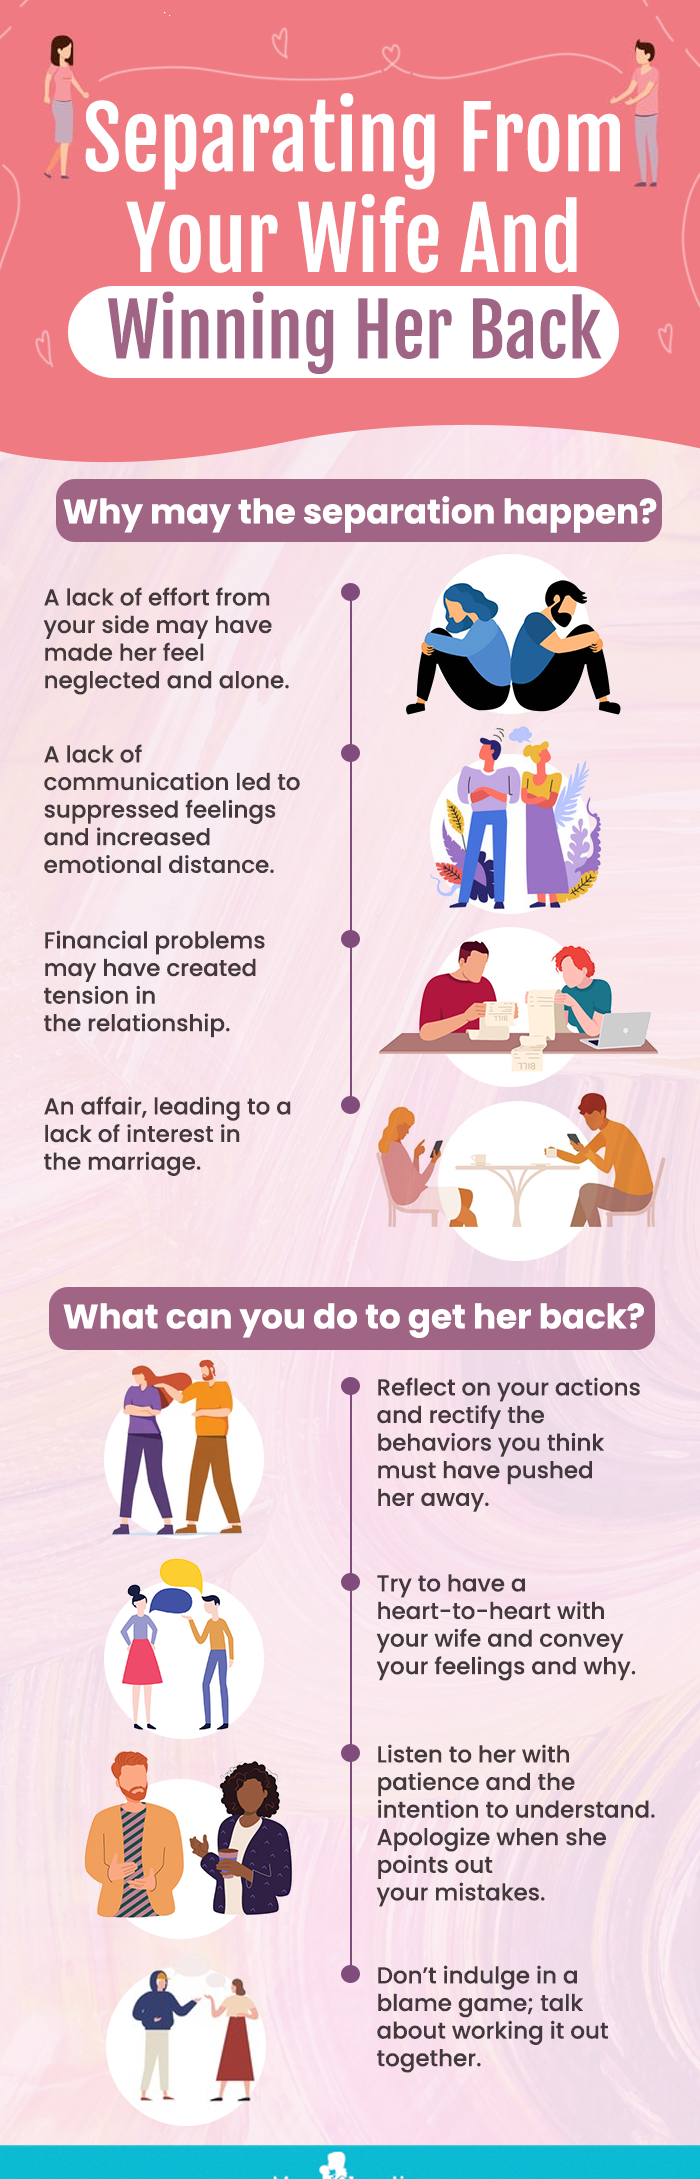 Save The Marriage SystemLike An Expert. Follow These 5 Steps To Get There